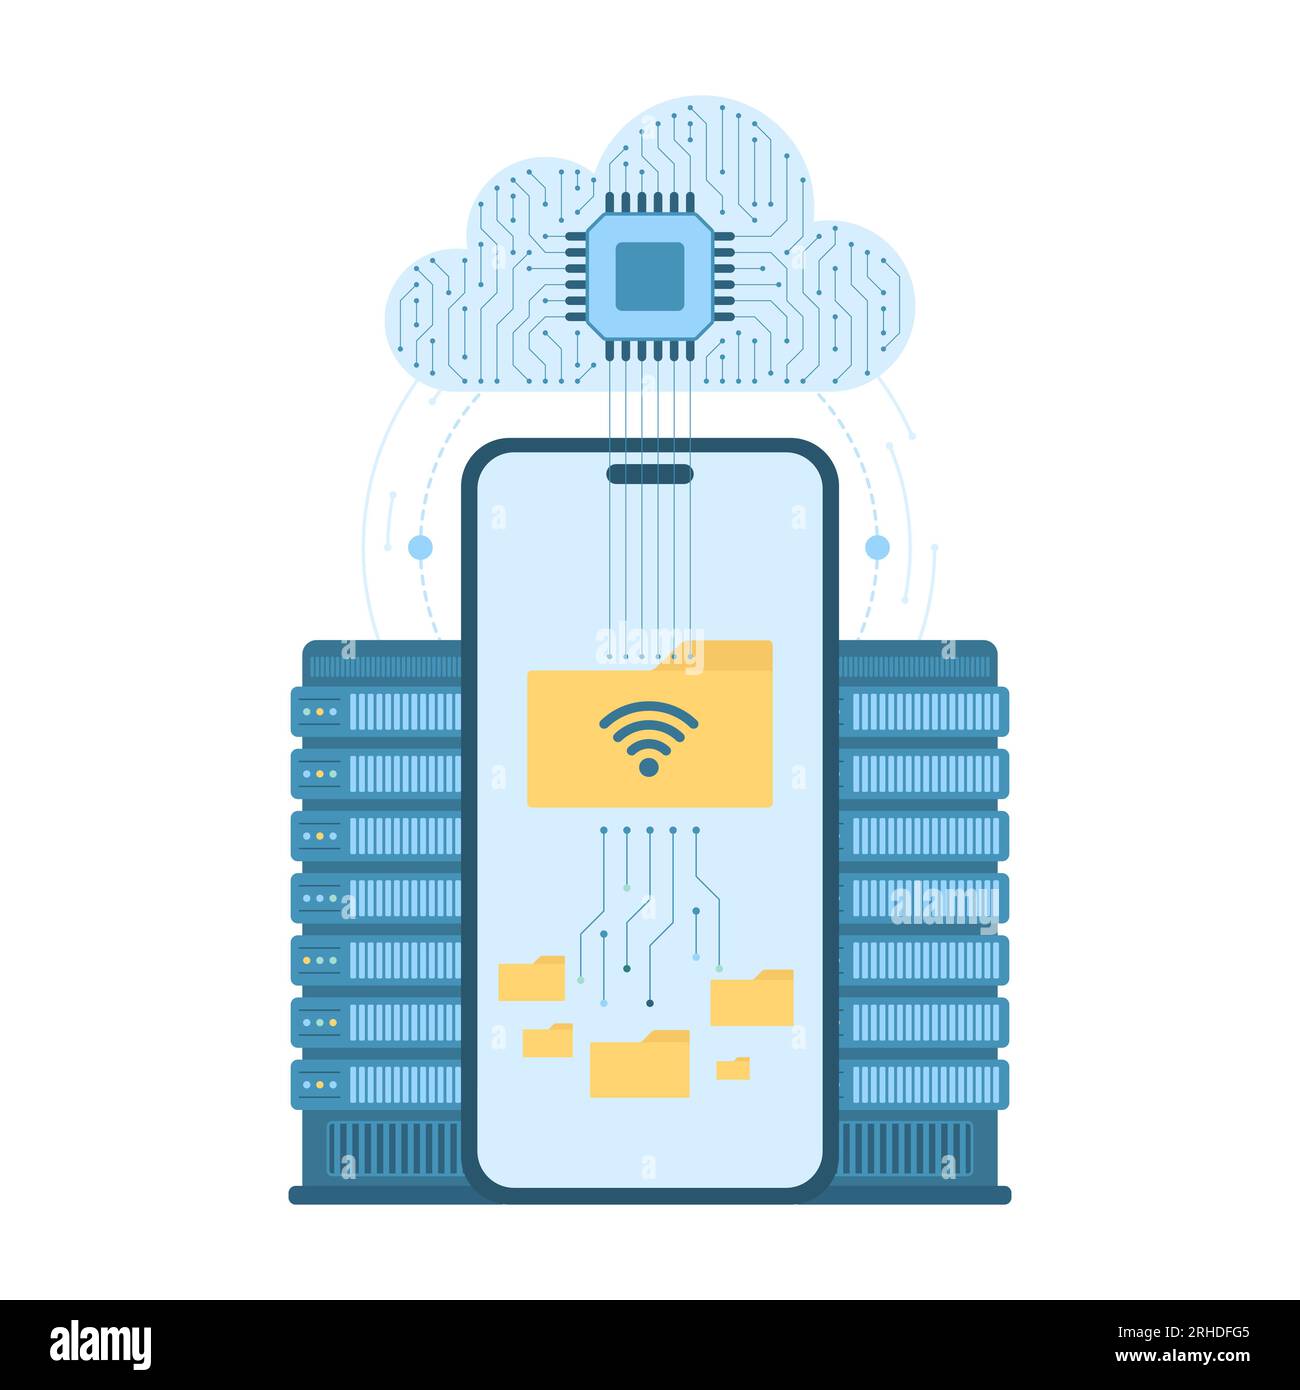 Cloud system for digital data synchronization, backup and storage vector illustration. Cartoon isolated folders with information on mobile phone screen synchronized through database server connection Stock Vector